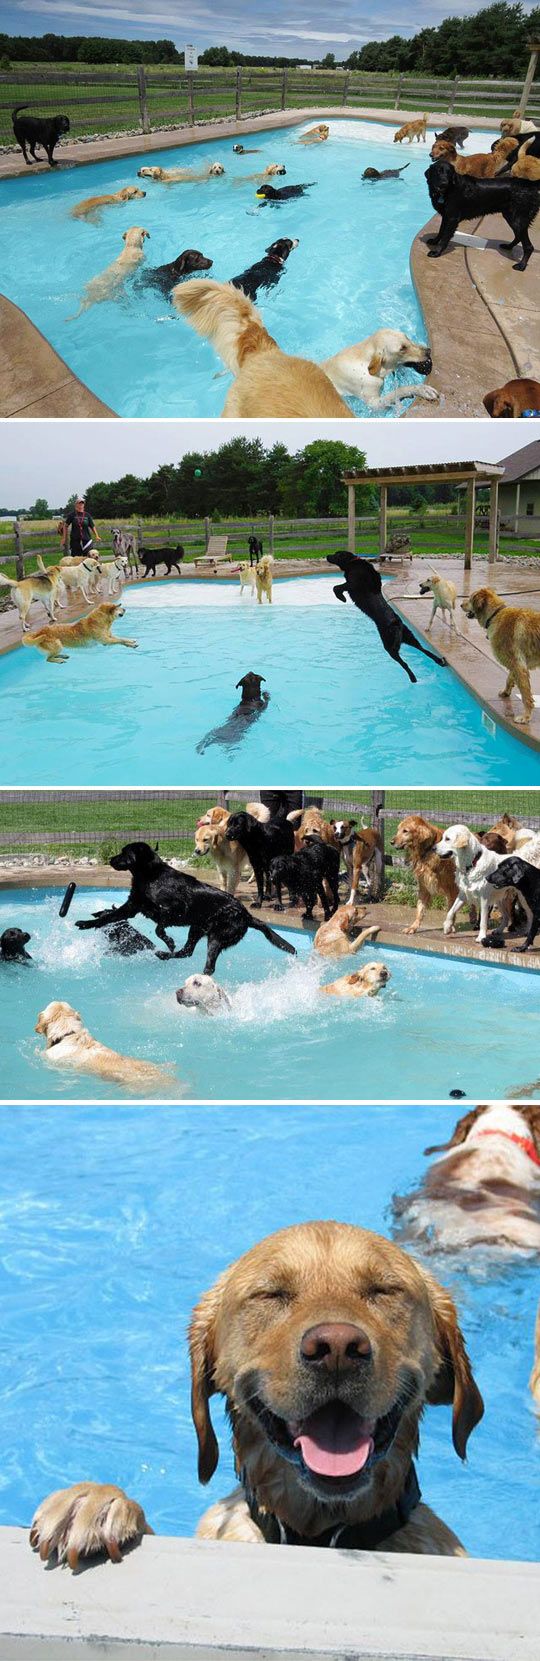 Doggy pool party just might be the happiest thing in the world